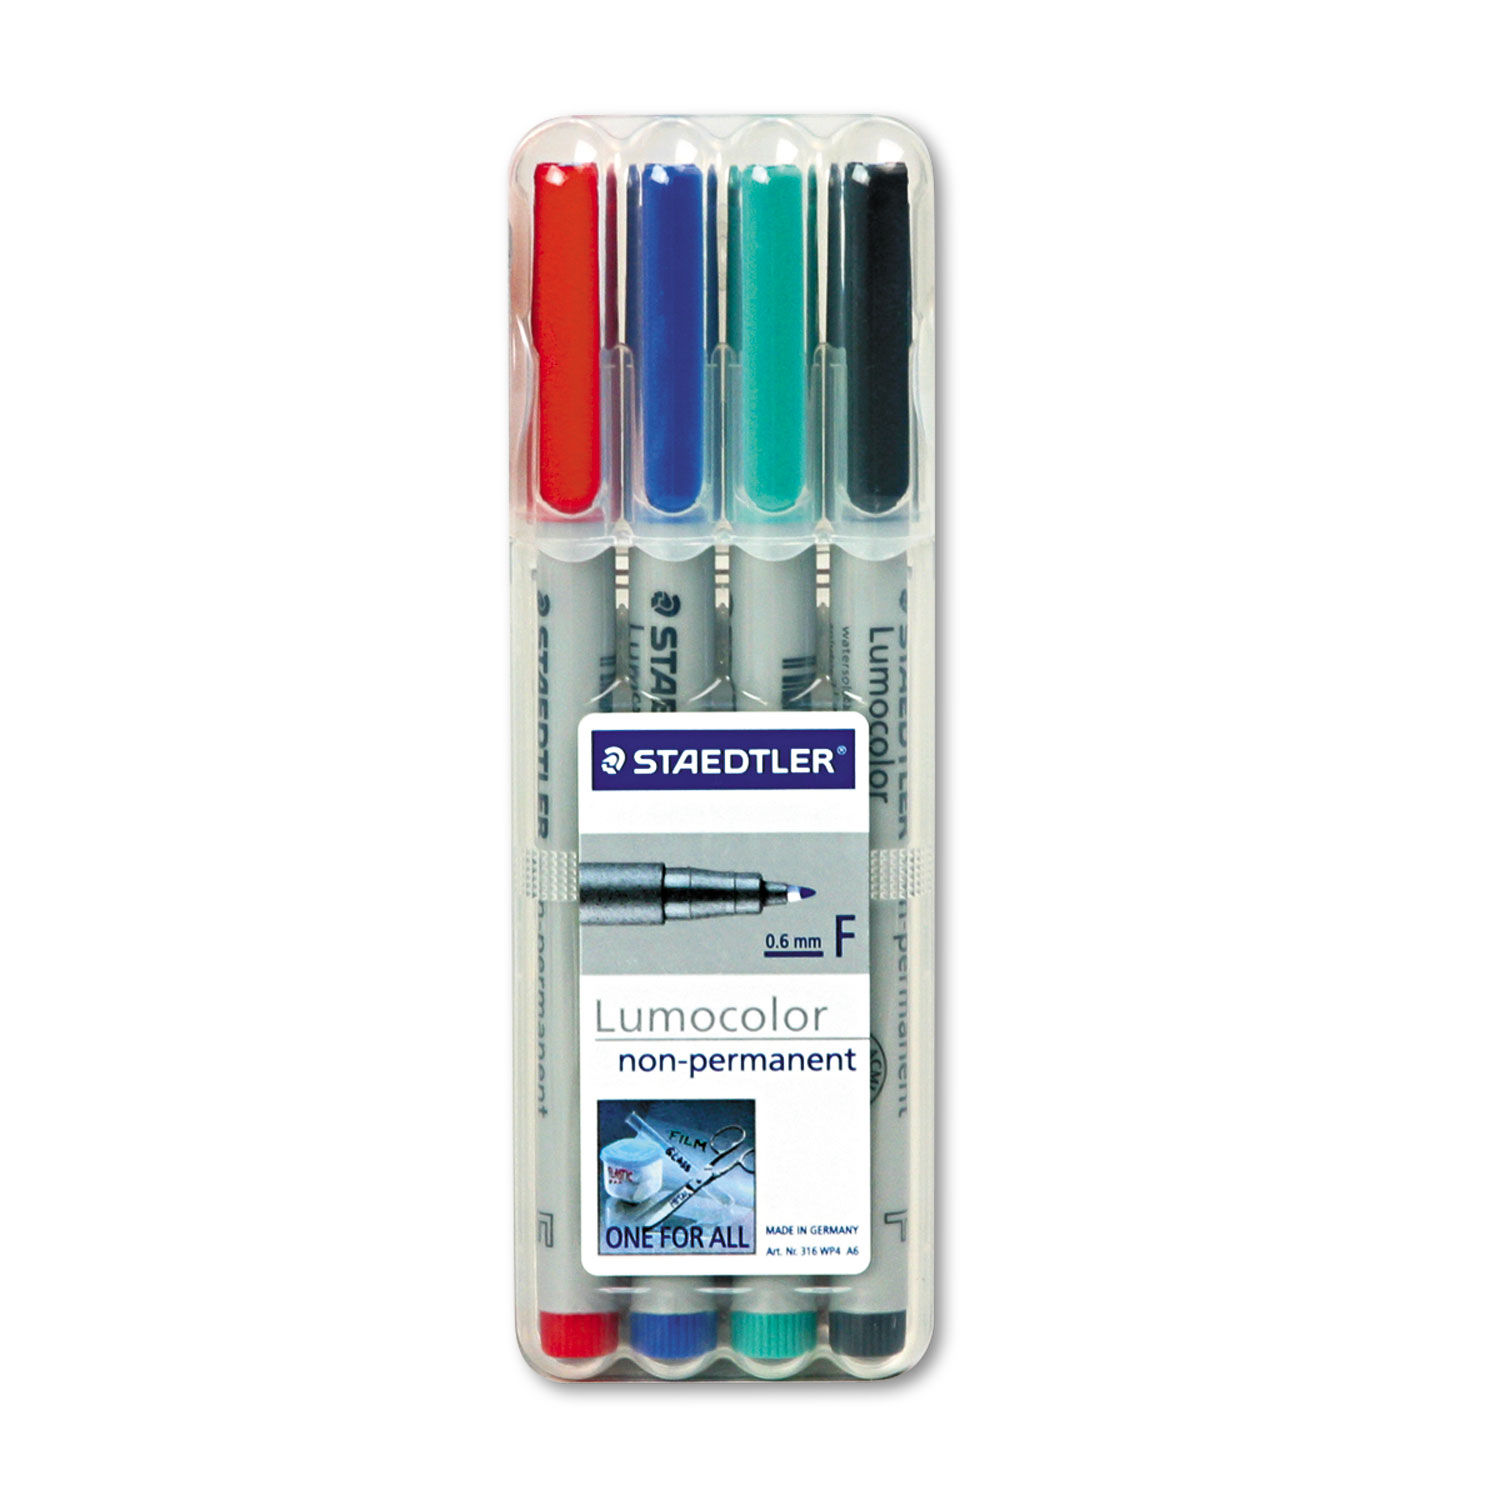 Staedtler Lumocolor Non-Permanent Fine Point Markers, 0.6mm F, Assorted, 4  Count (STD316WP4A6)